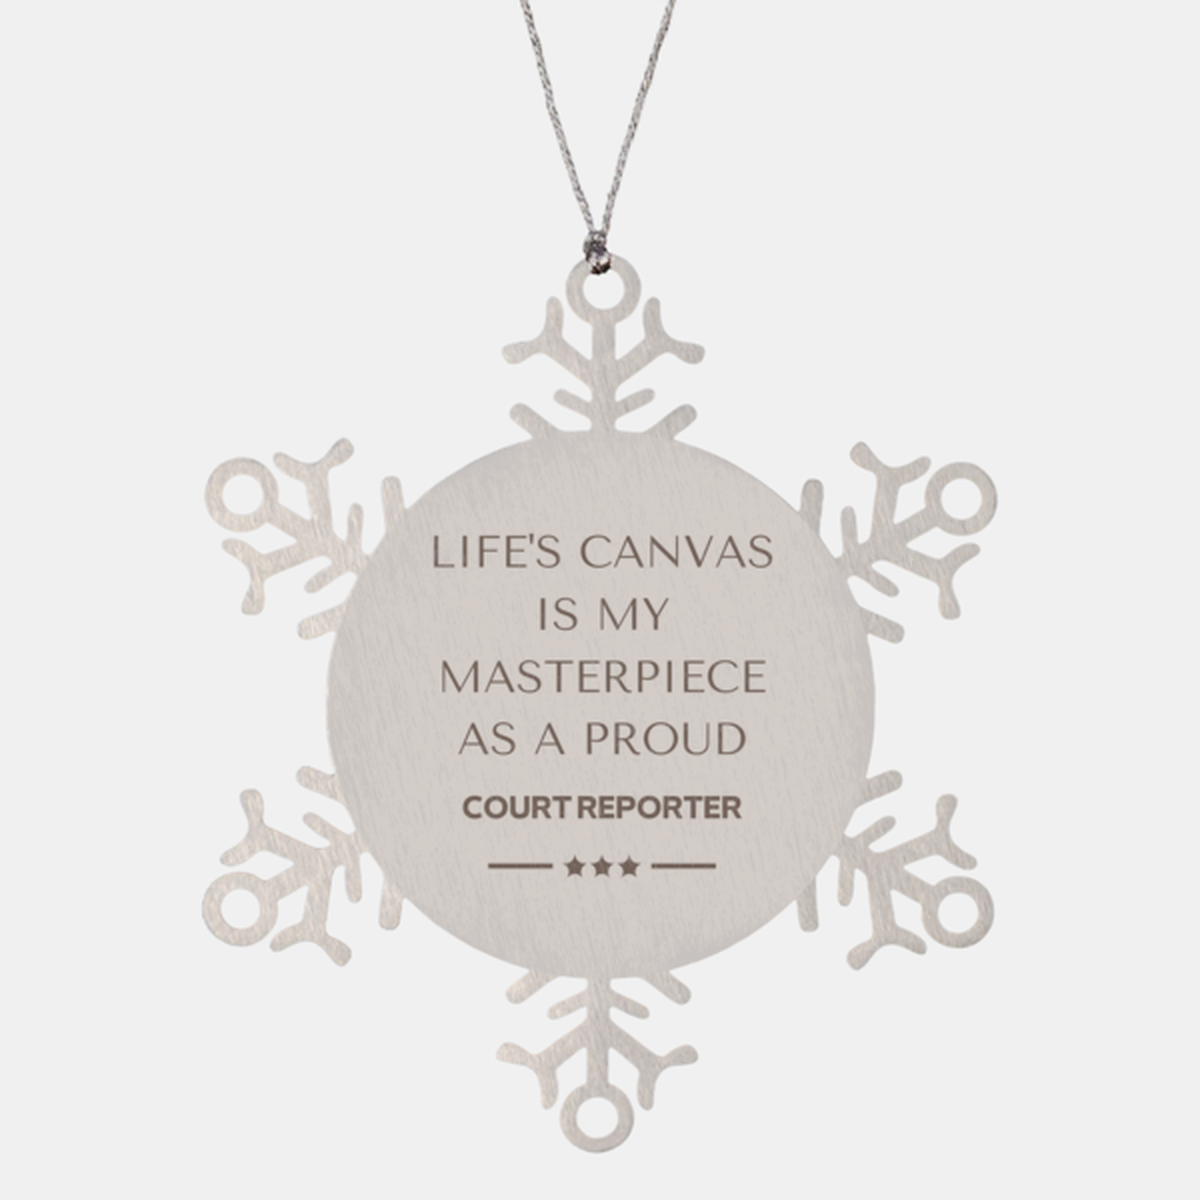 Proud Court Reporter Gifts, Life's canvas is my masterpiece, Epic Birthday Christmas Unique Snowflake Ornament For Court Reporter, Coworkers, Men, Women, Friends